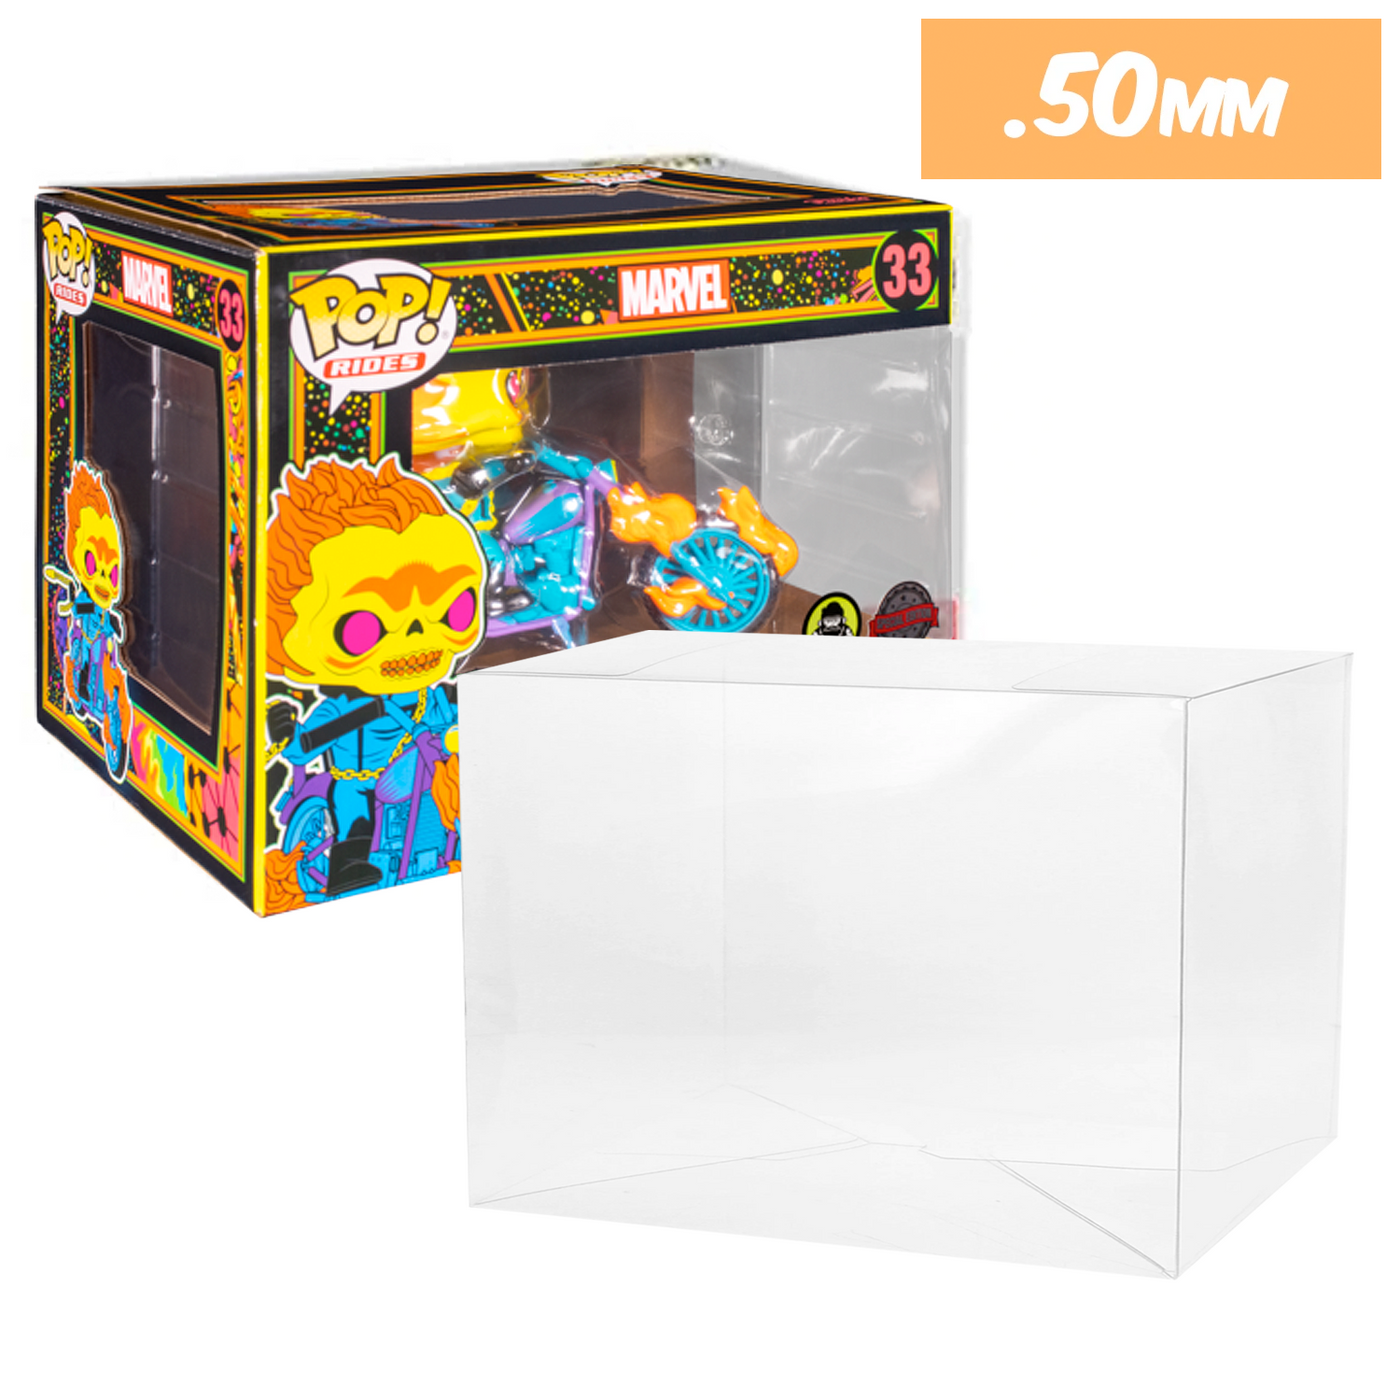 blacklight ghost rider pop rides best funko pop protectors thick strong uv scratch flat top stack vinyl display geek plastic shield vaulted eco armor fits collect protect display case kollector protector